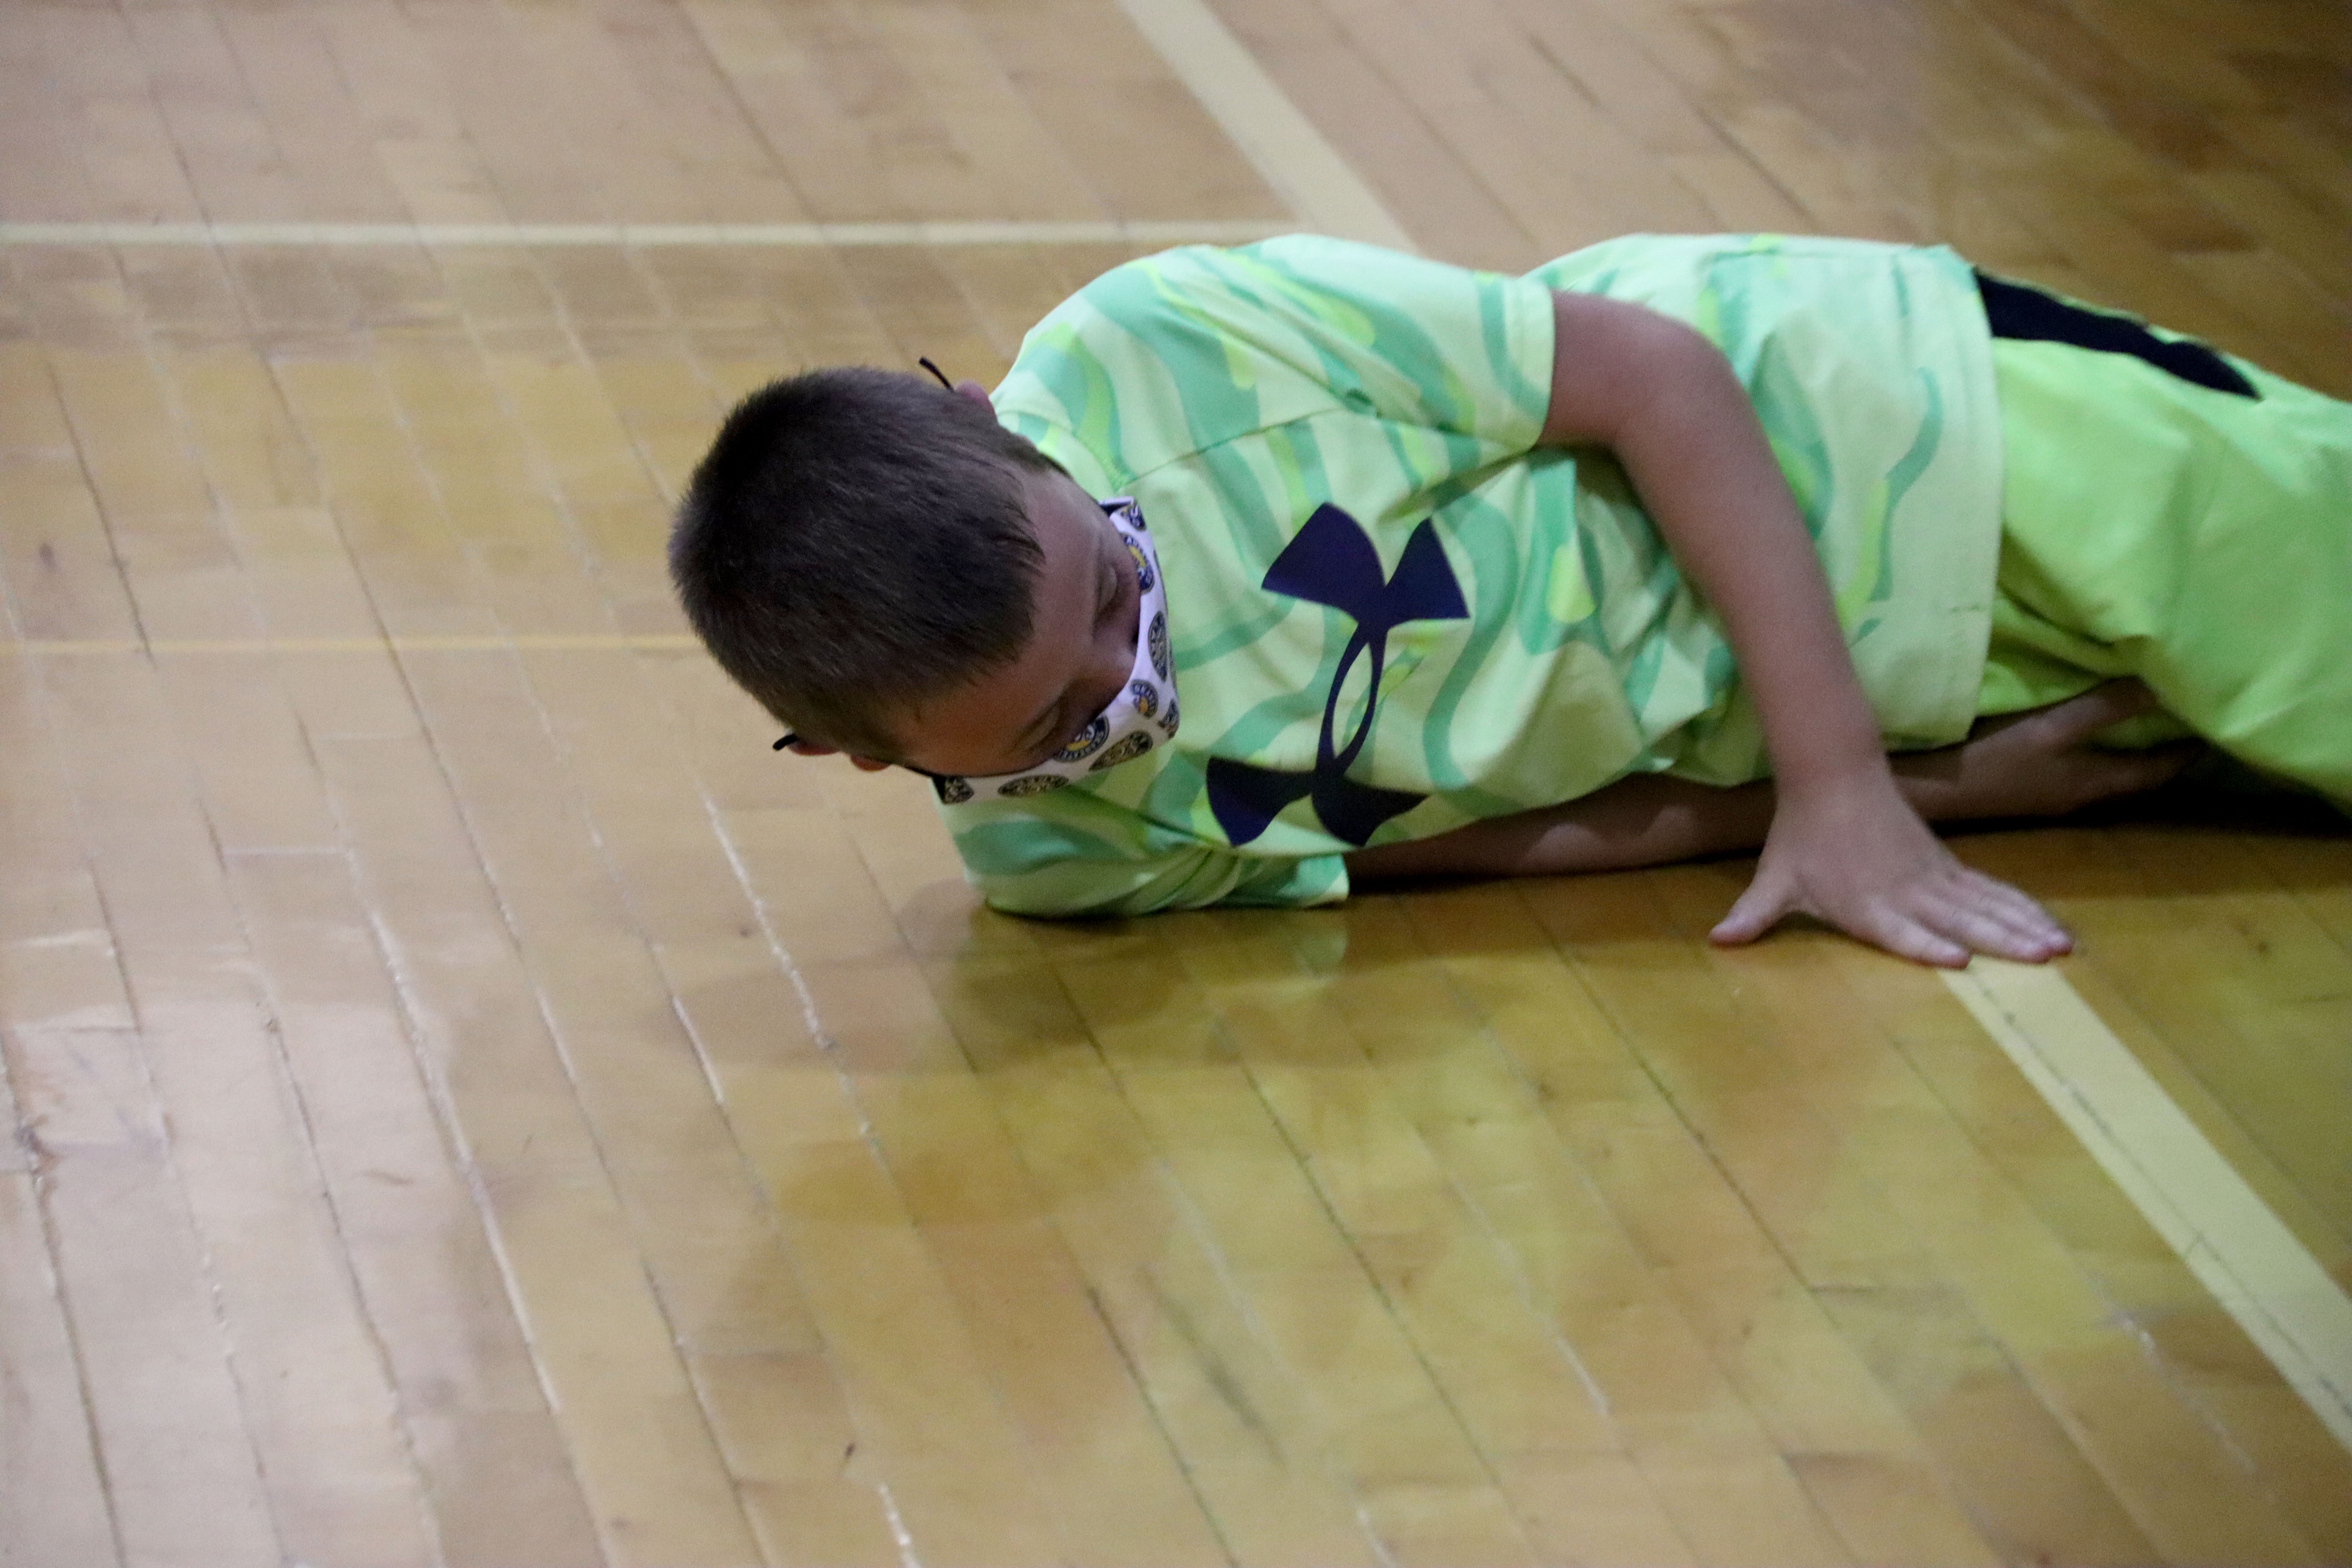 A State Street student demonstrates how to stop, drop, and roll